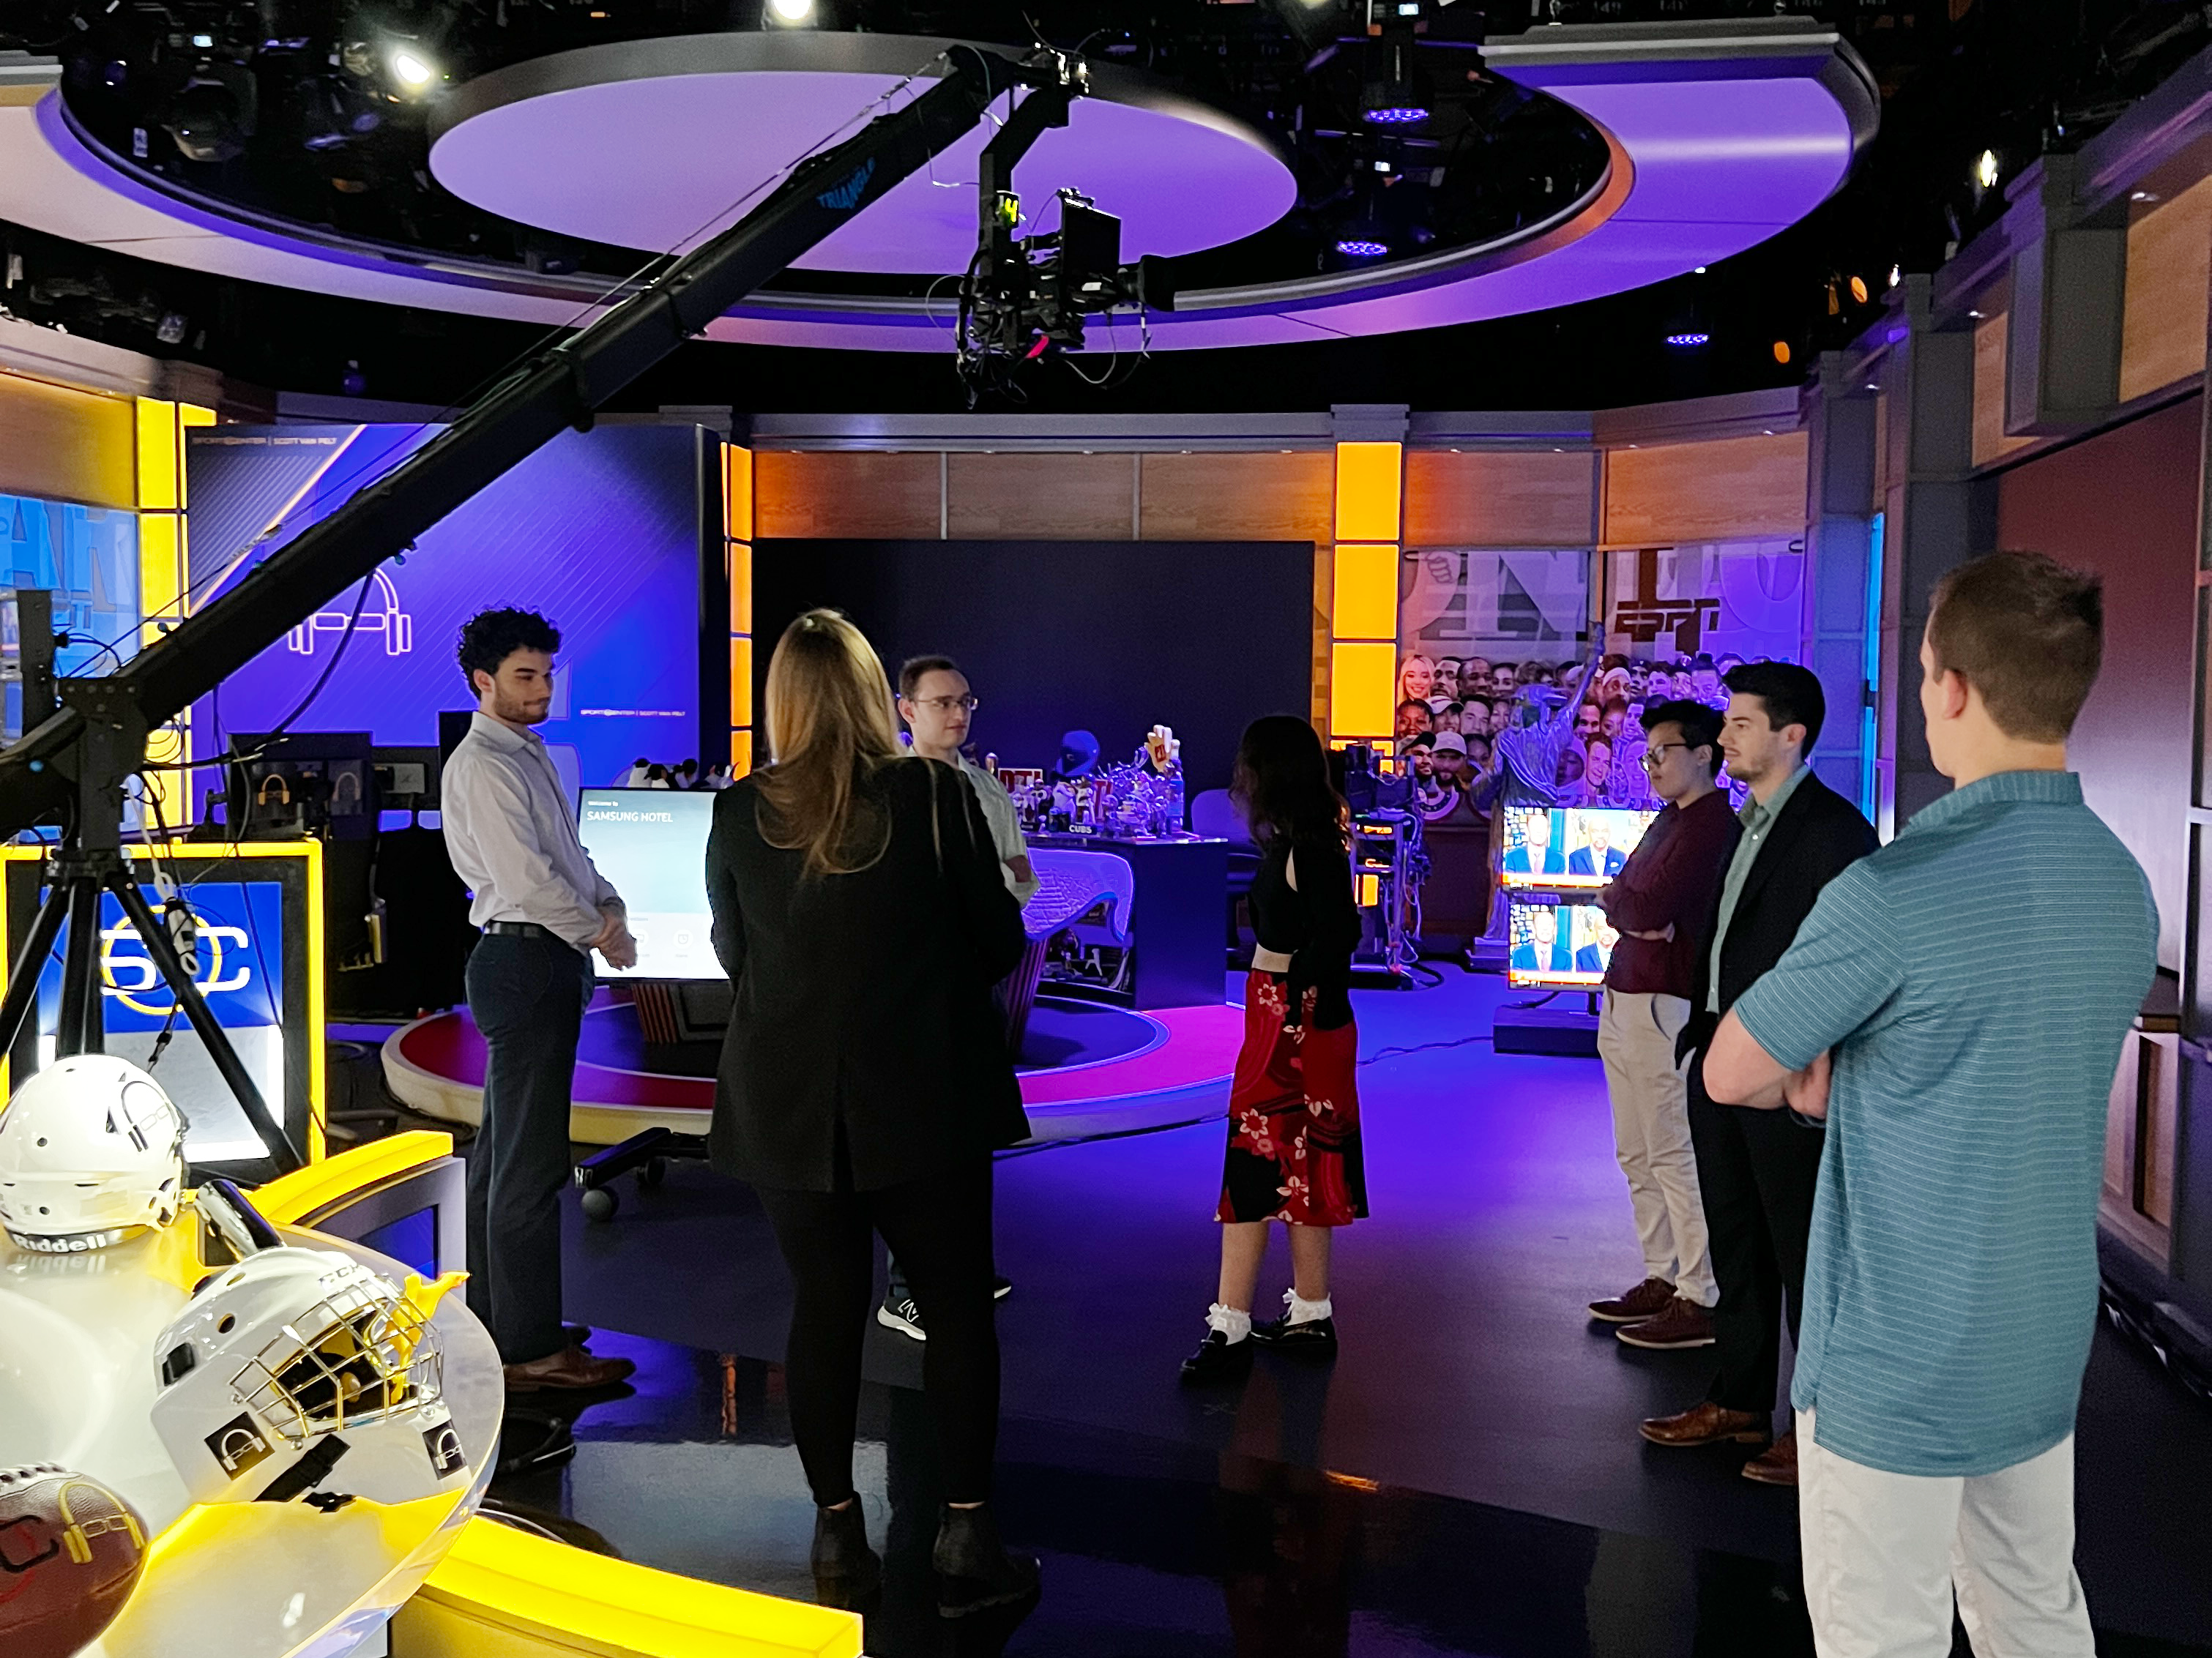 Behind the scenes on television news set